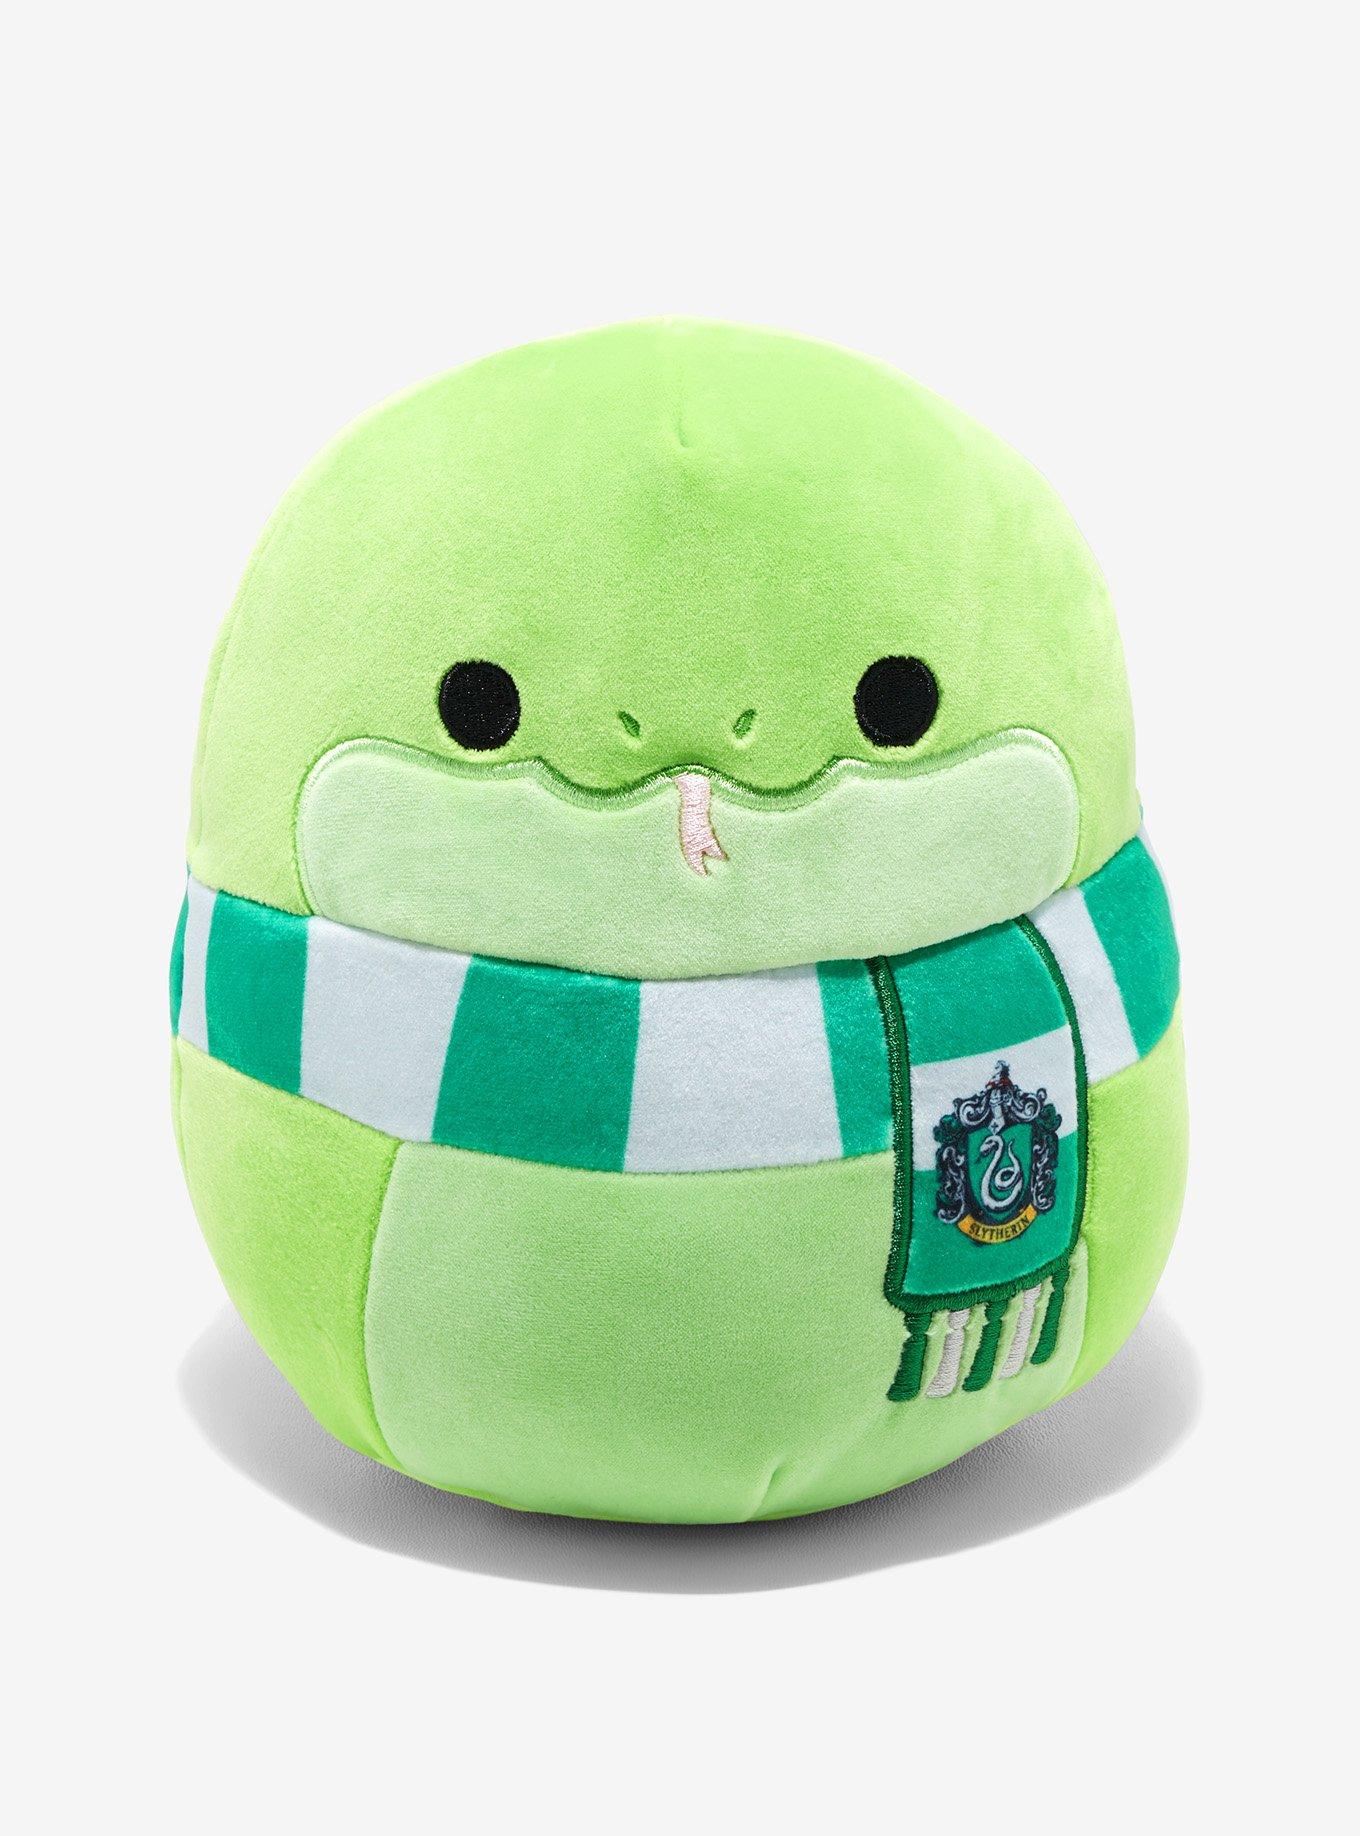 Slytherin squishmallow I got today. His name is Felton. : r/harrypotter